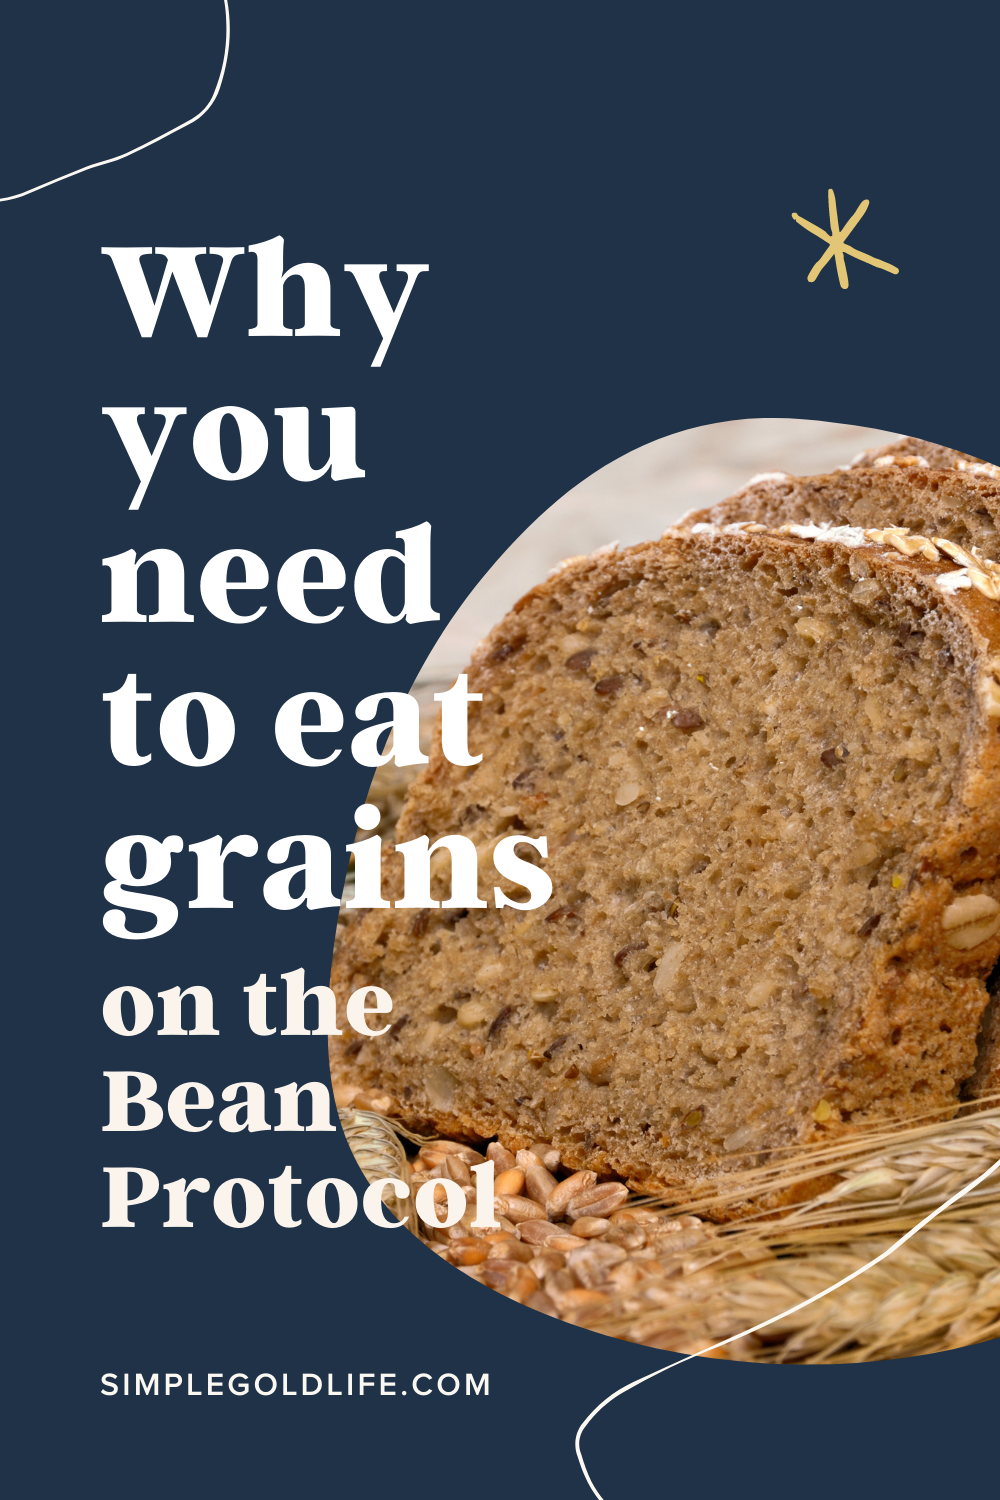 Benefits of grains on the Bean Protocol 3 .png